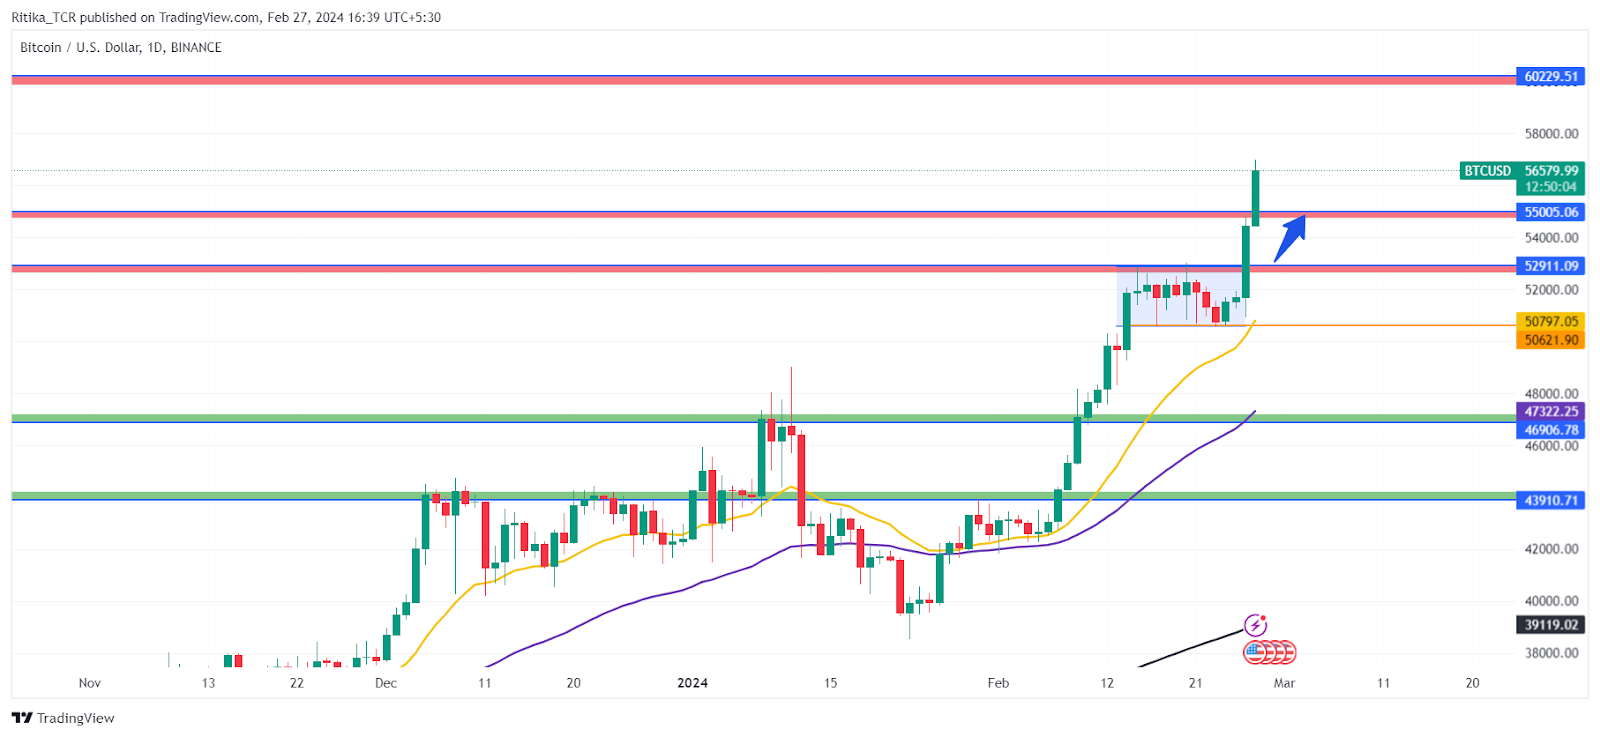 BTC Approaching 60K, ETH Conquers 3K: What’s Driving The Growth?